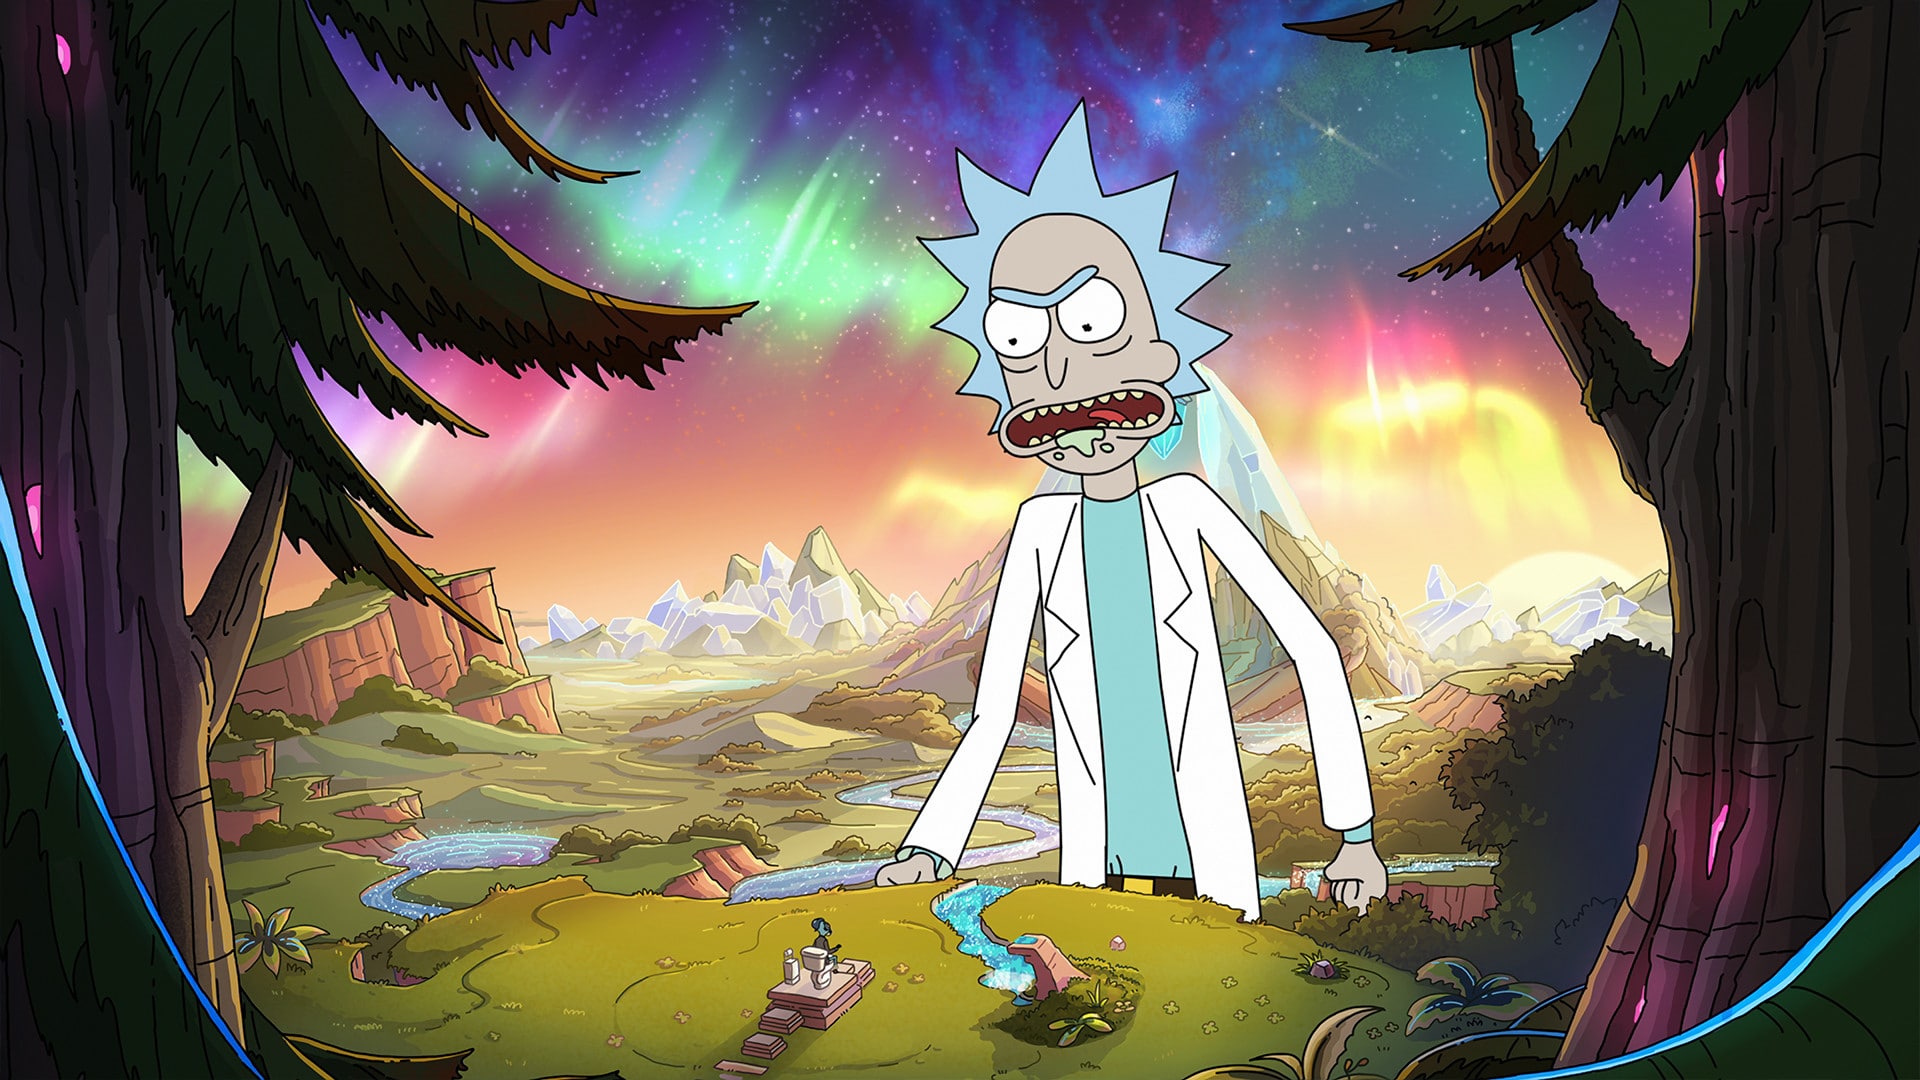 Rick and Morty' Has Won The "Outstanding Animated Program" A...